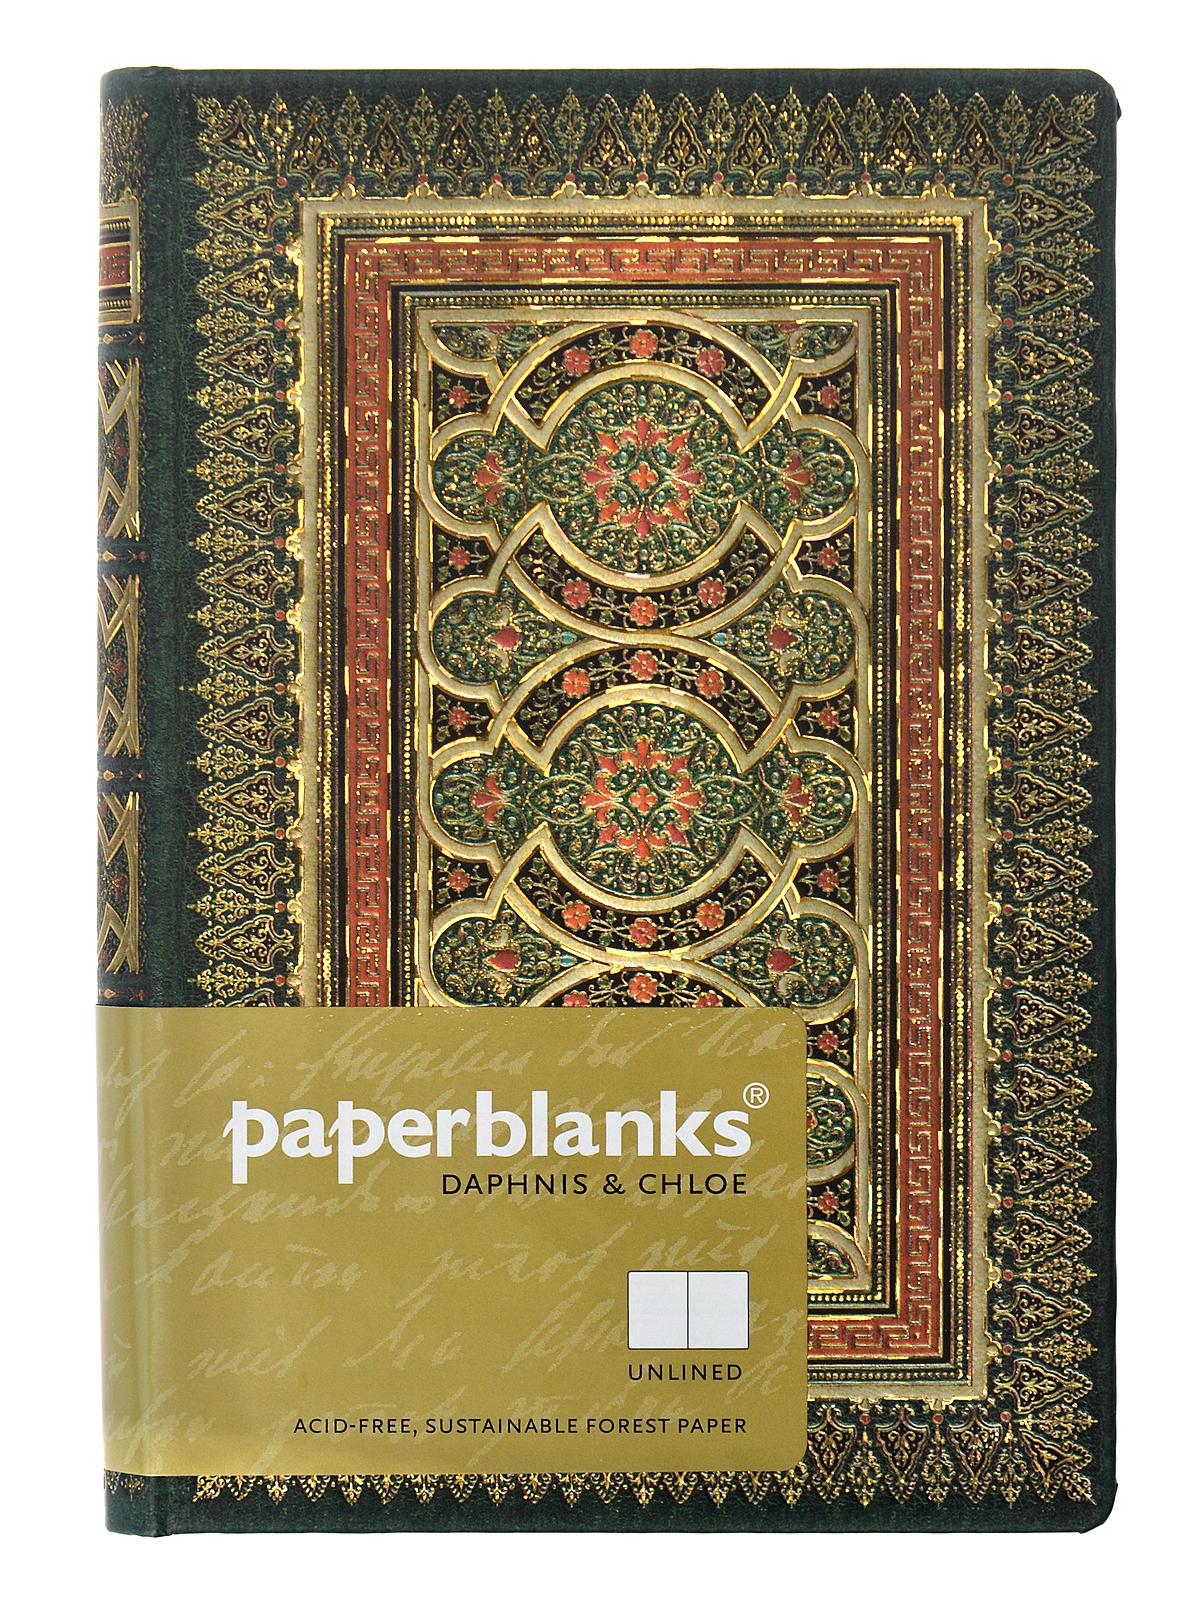 Daphnis & Chloe Daphnis Mini, 3 3 4 In. X 5 1 2 In. 240 Pages, Unlined